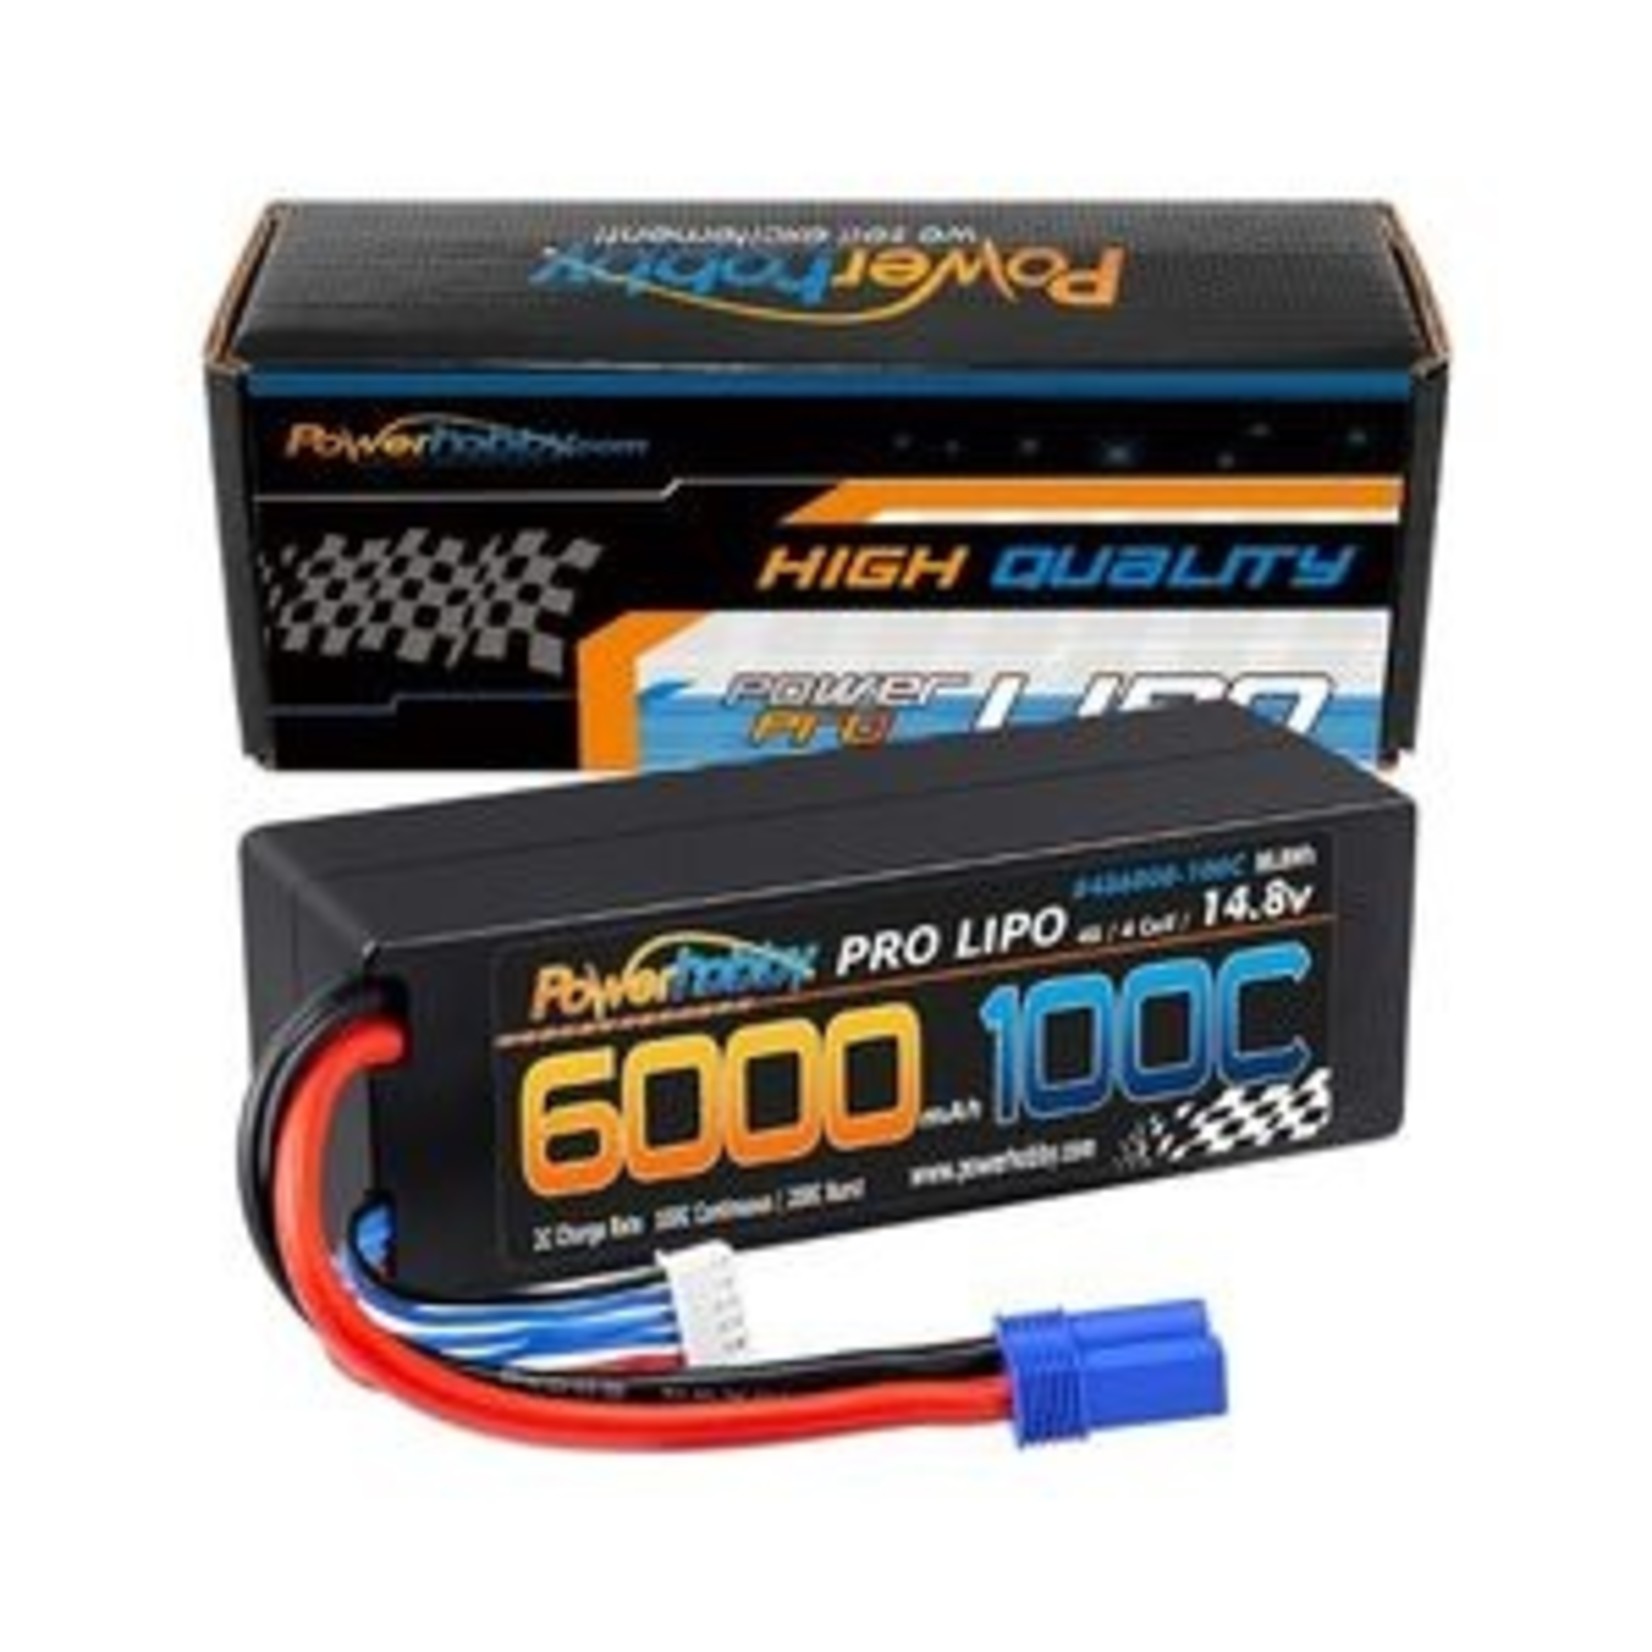 Power Hobby PHB4S6000100CEC5  4S 14.8v 6000mAh 100C LiPo Battery w/ EC5 Hard Case 4-cell 100C Continuous / 200C Brust